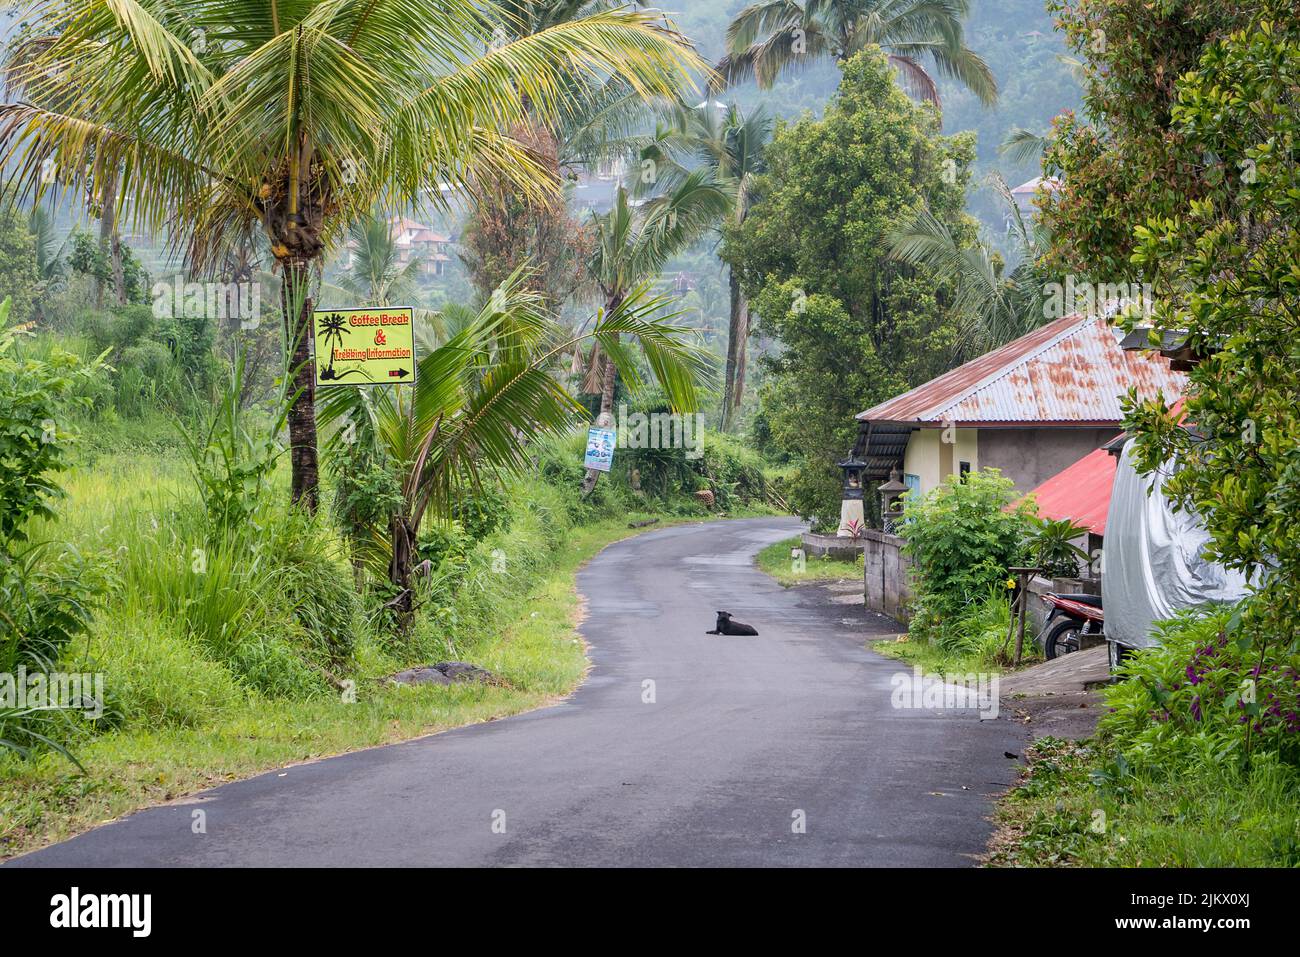 A natural view of a street near houses and agricultural fields in  Munduk, Bali, Indonesia Stock Photo